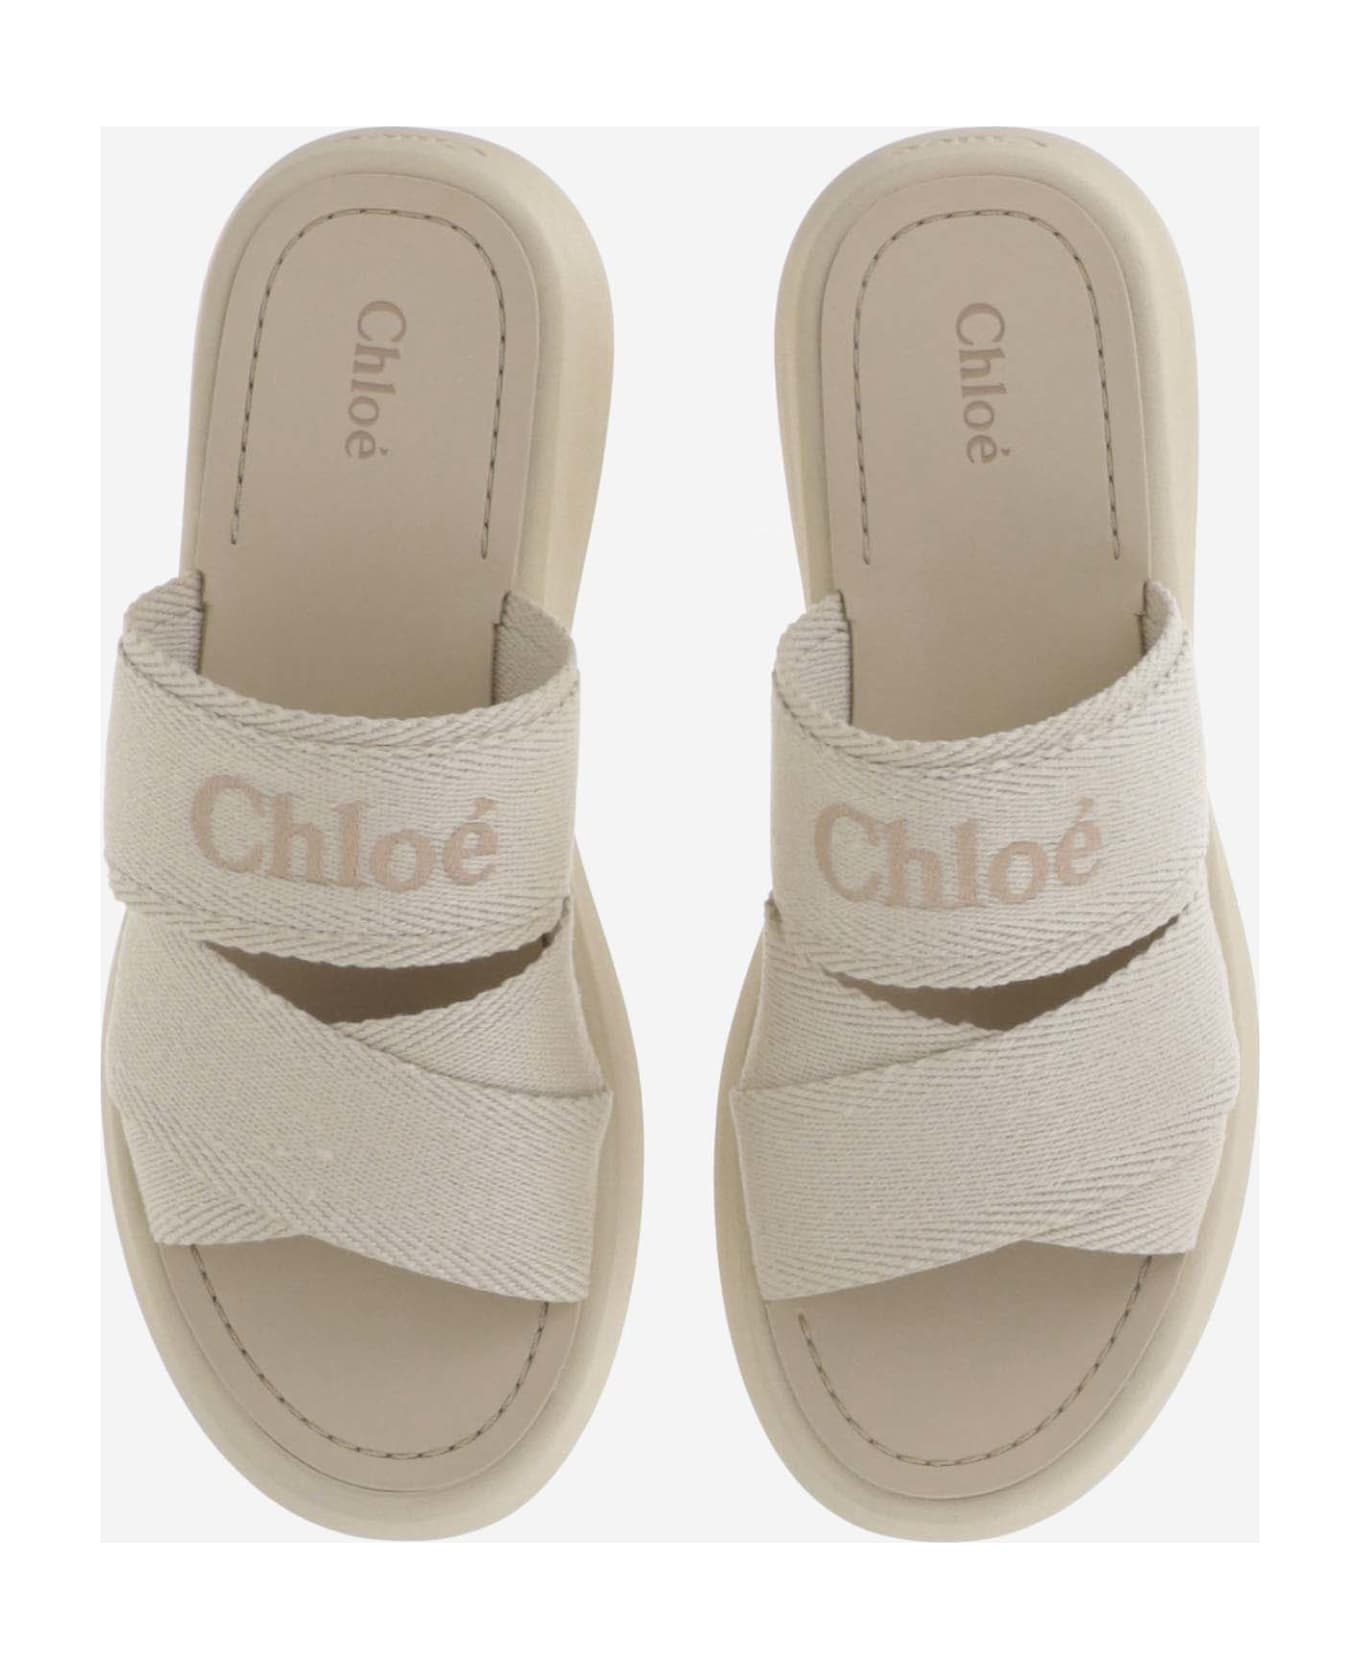 Chloé Canvas Sandals With Logo - Pearl beige